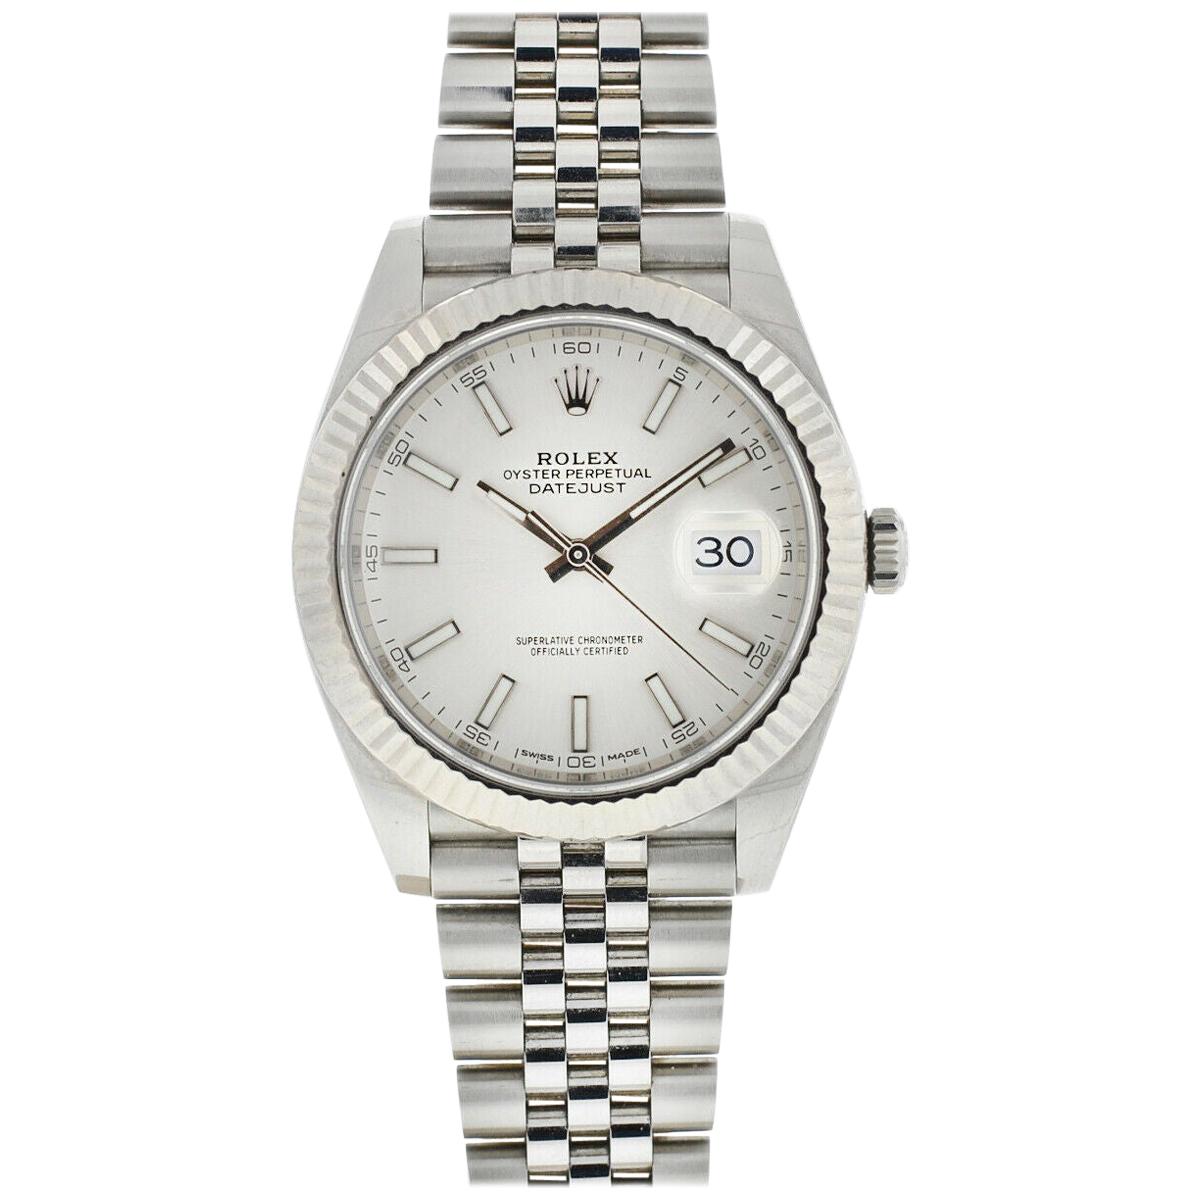 Rolex Silver 126334 Datejust 41 Dial White Gold Jubilee Watch